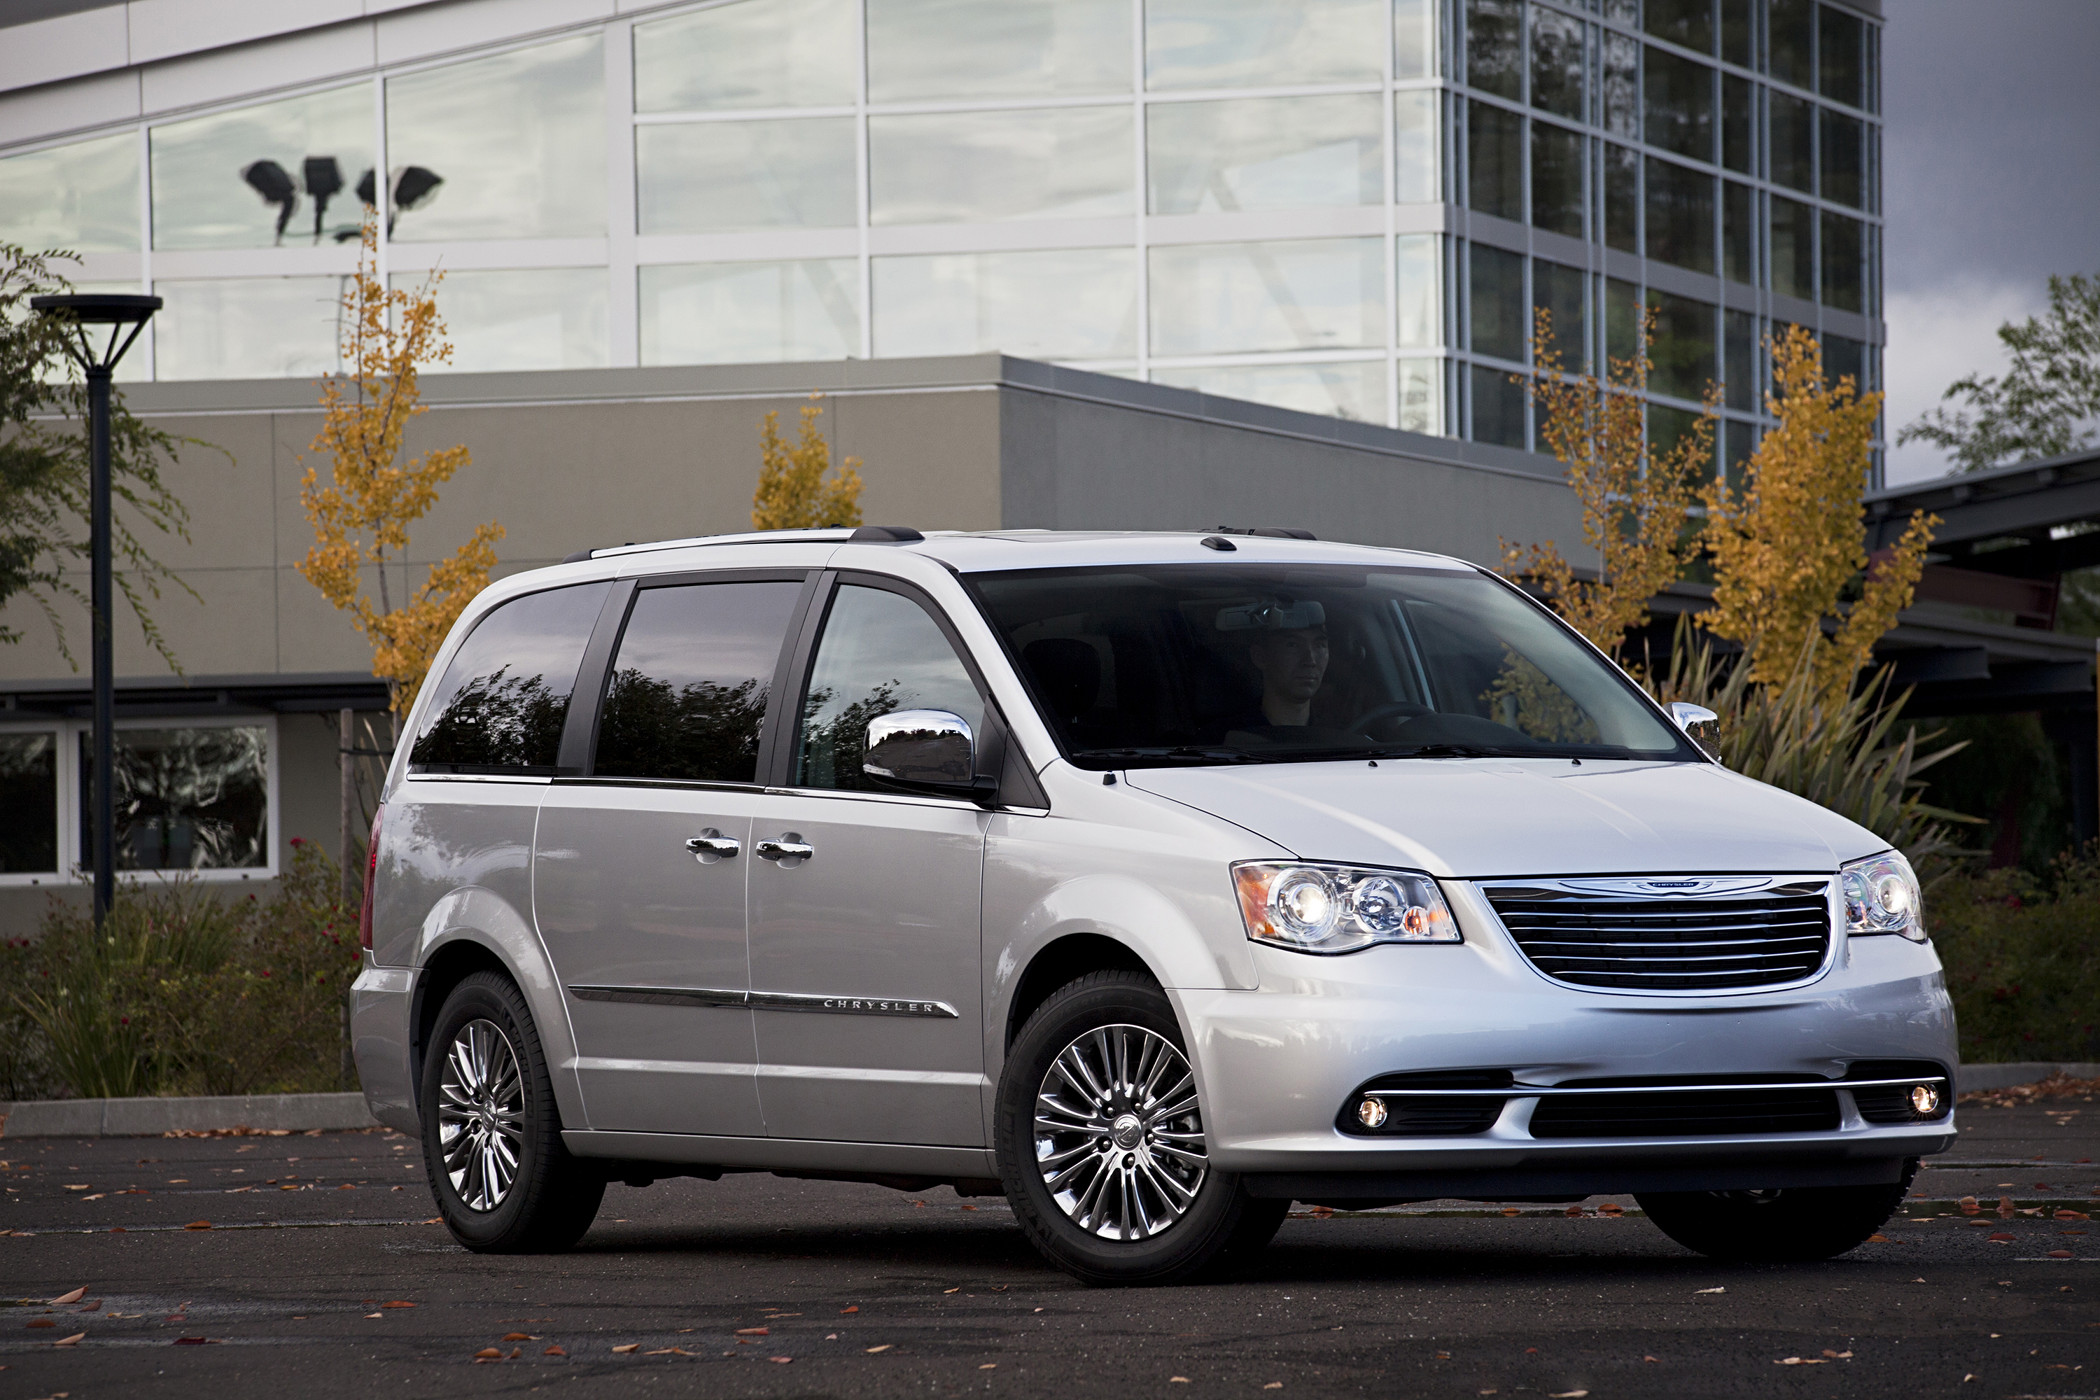 Parts for chrysler town and country minivan